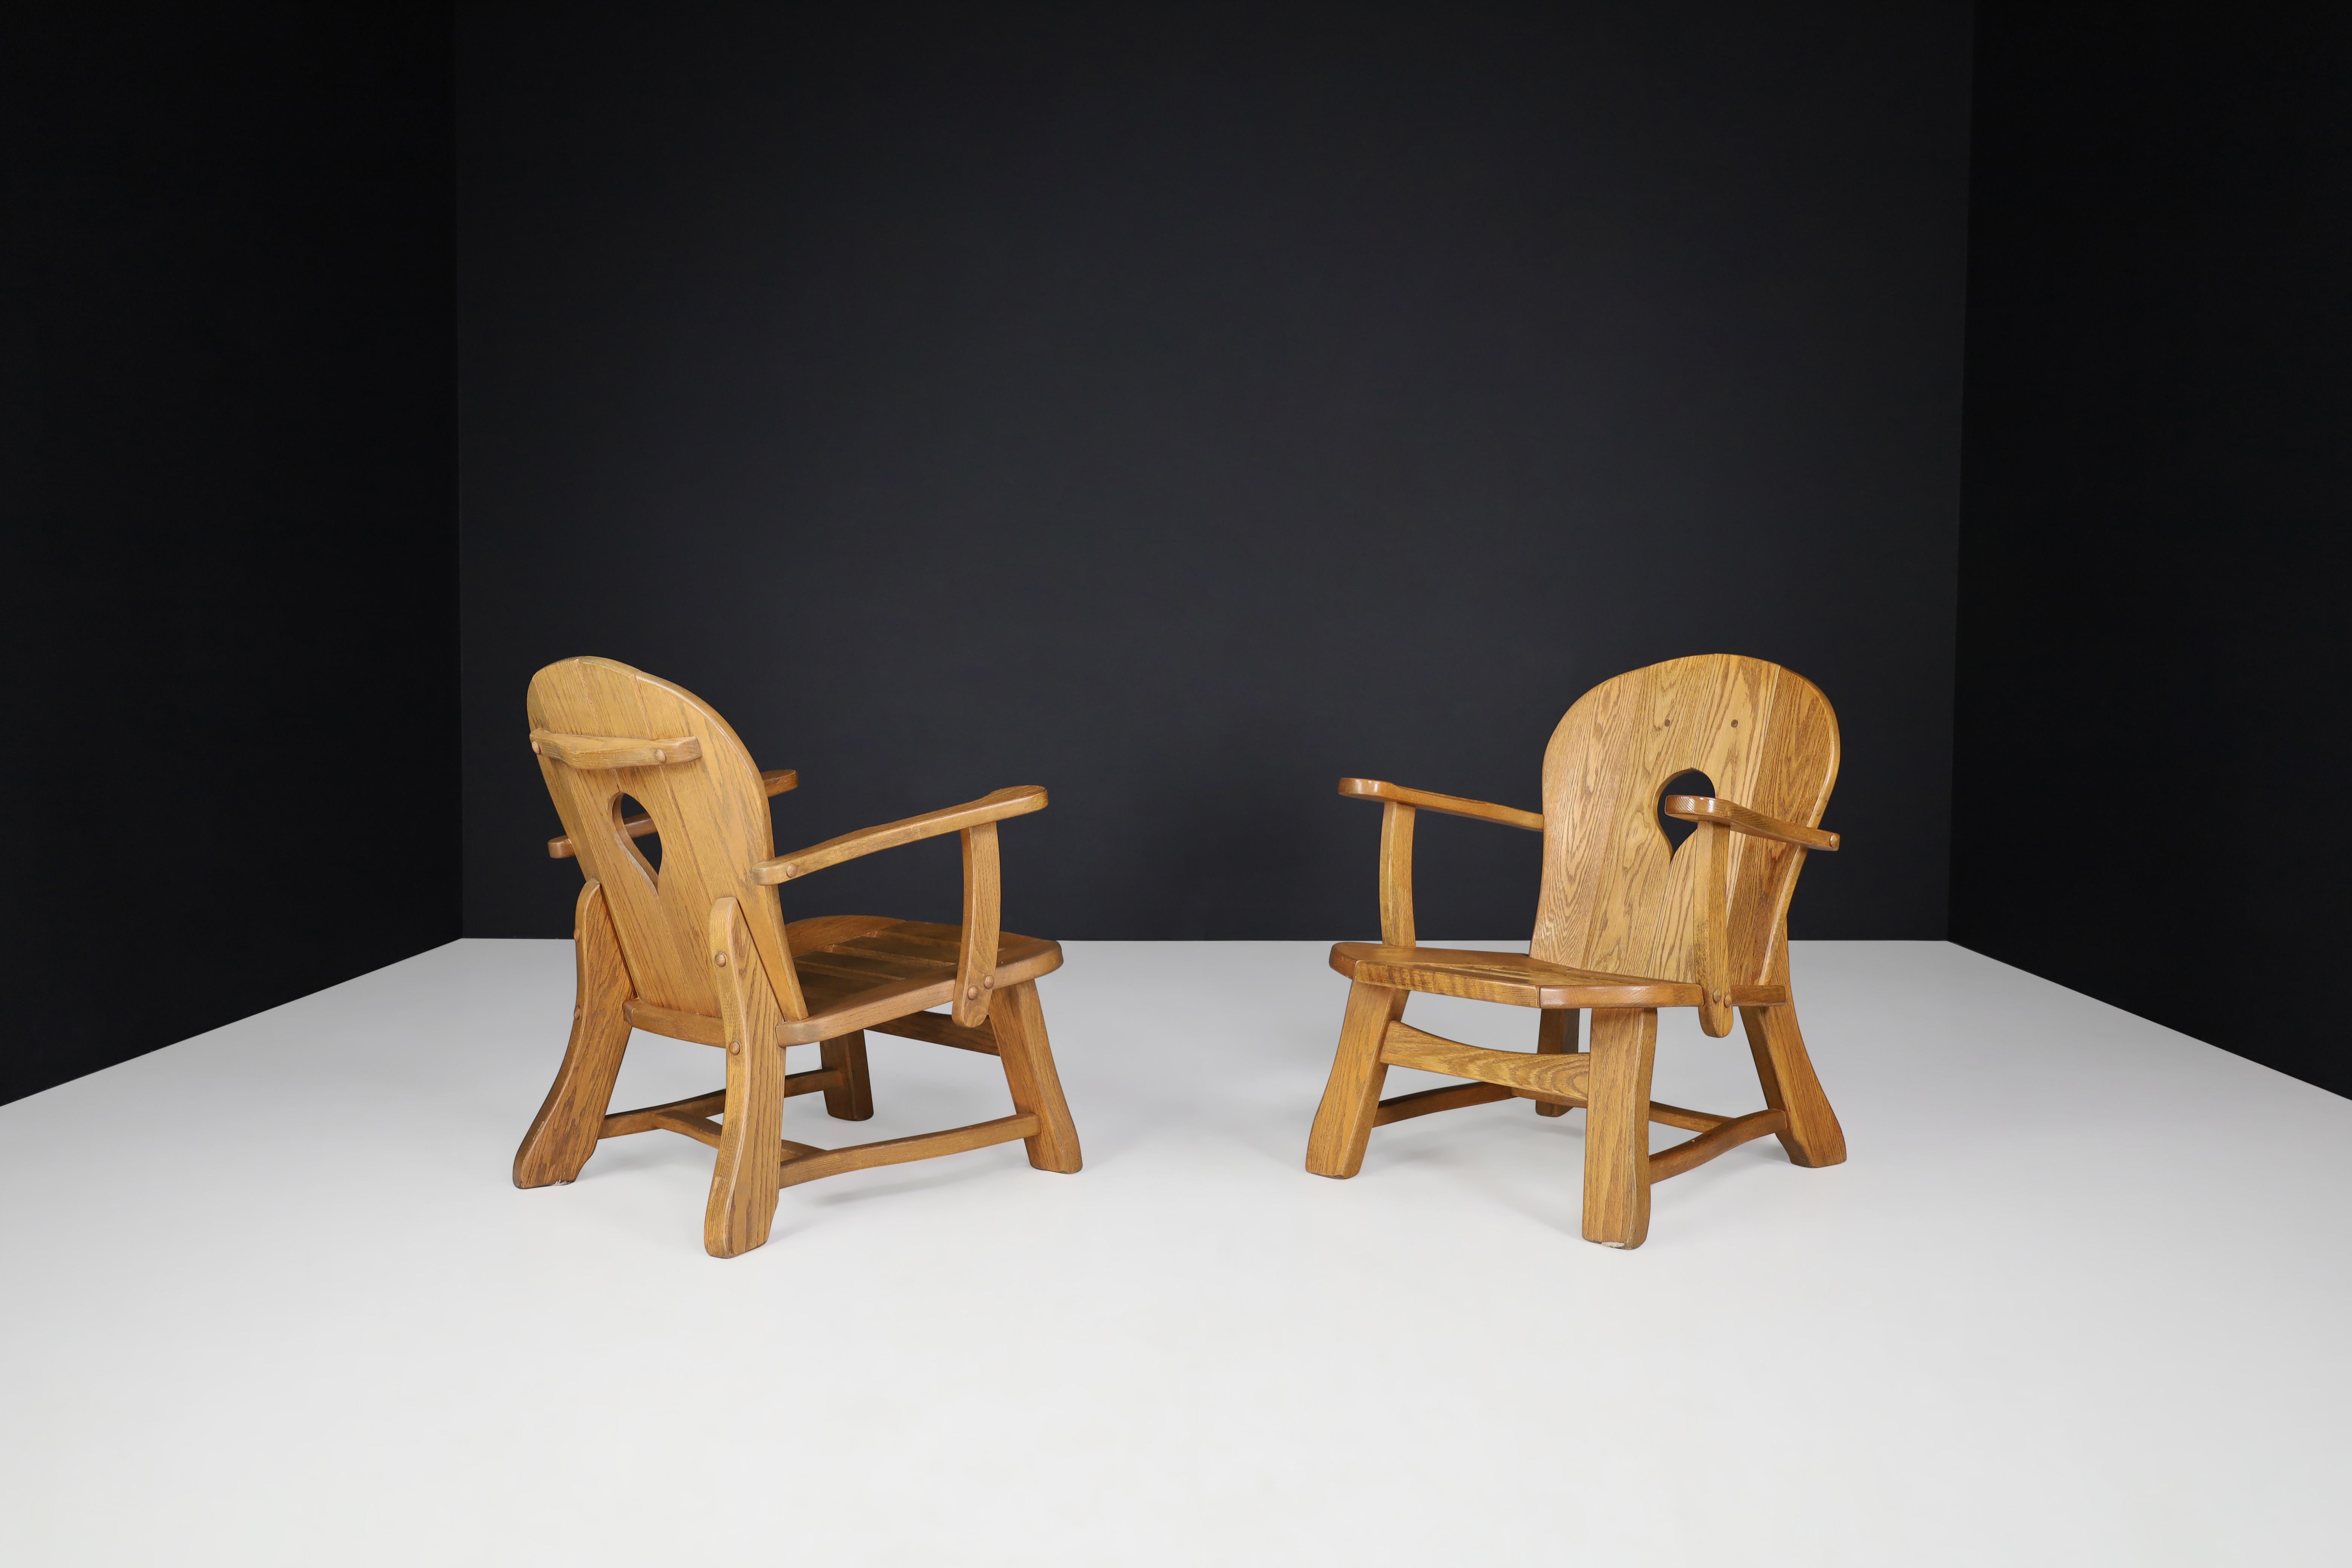 Sculptural Lounge Chairs in Oak, France, 1960s For Sale 2